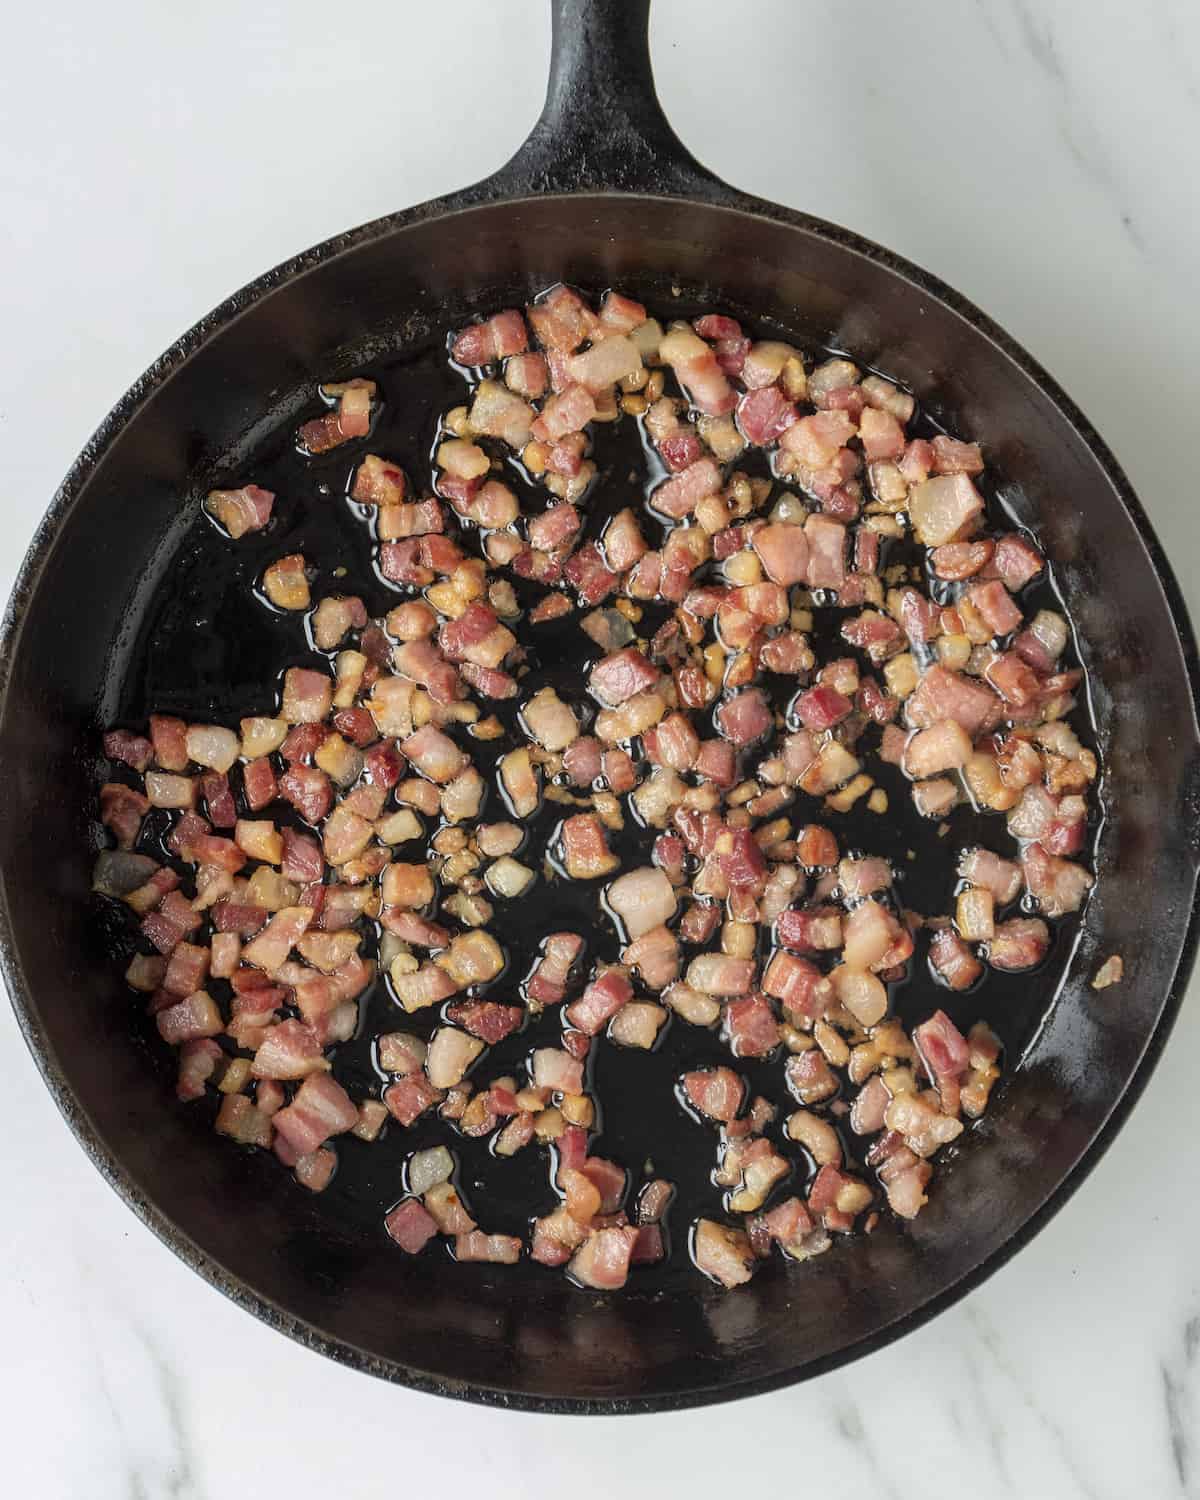 Diced pancetta frying in a cast iron skillet.